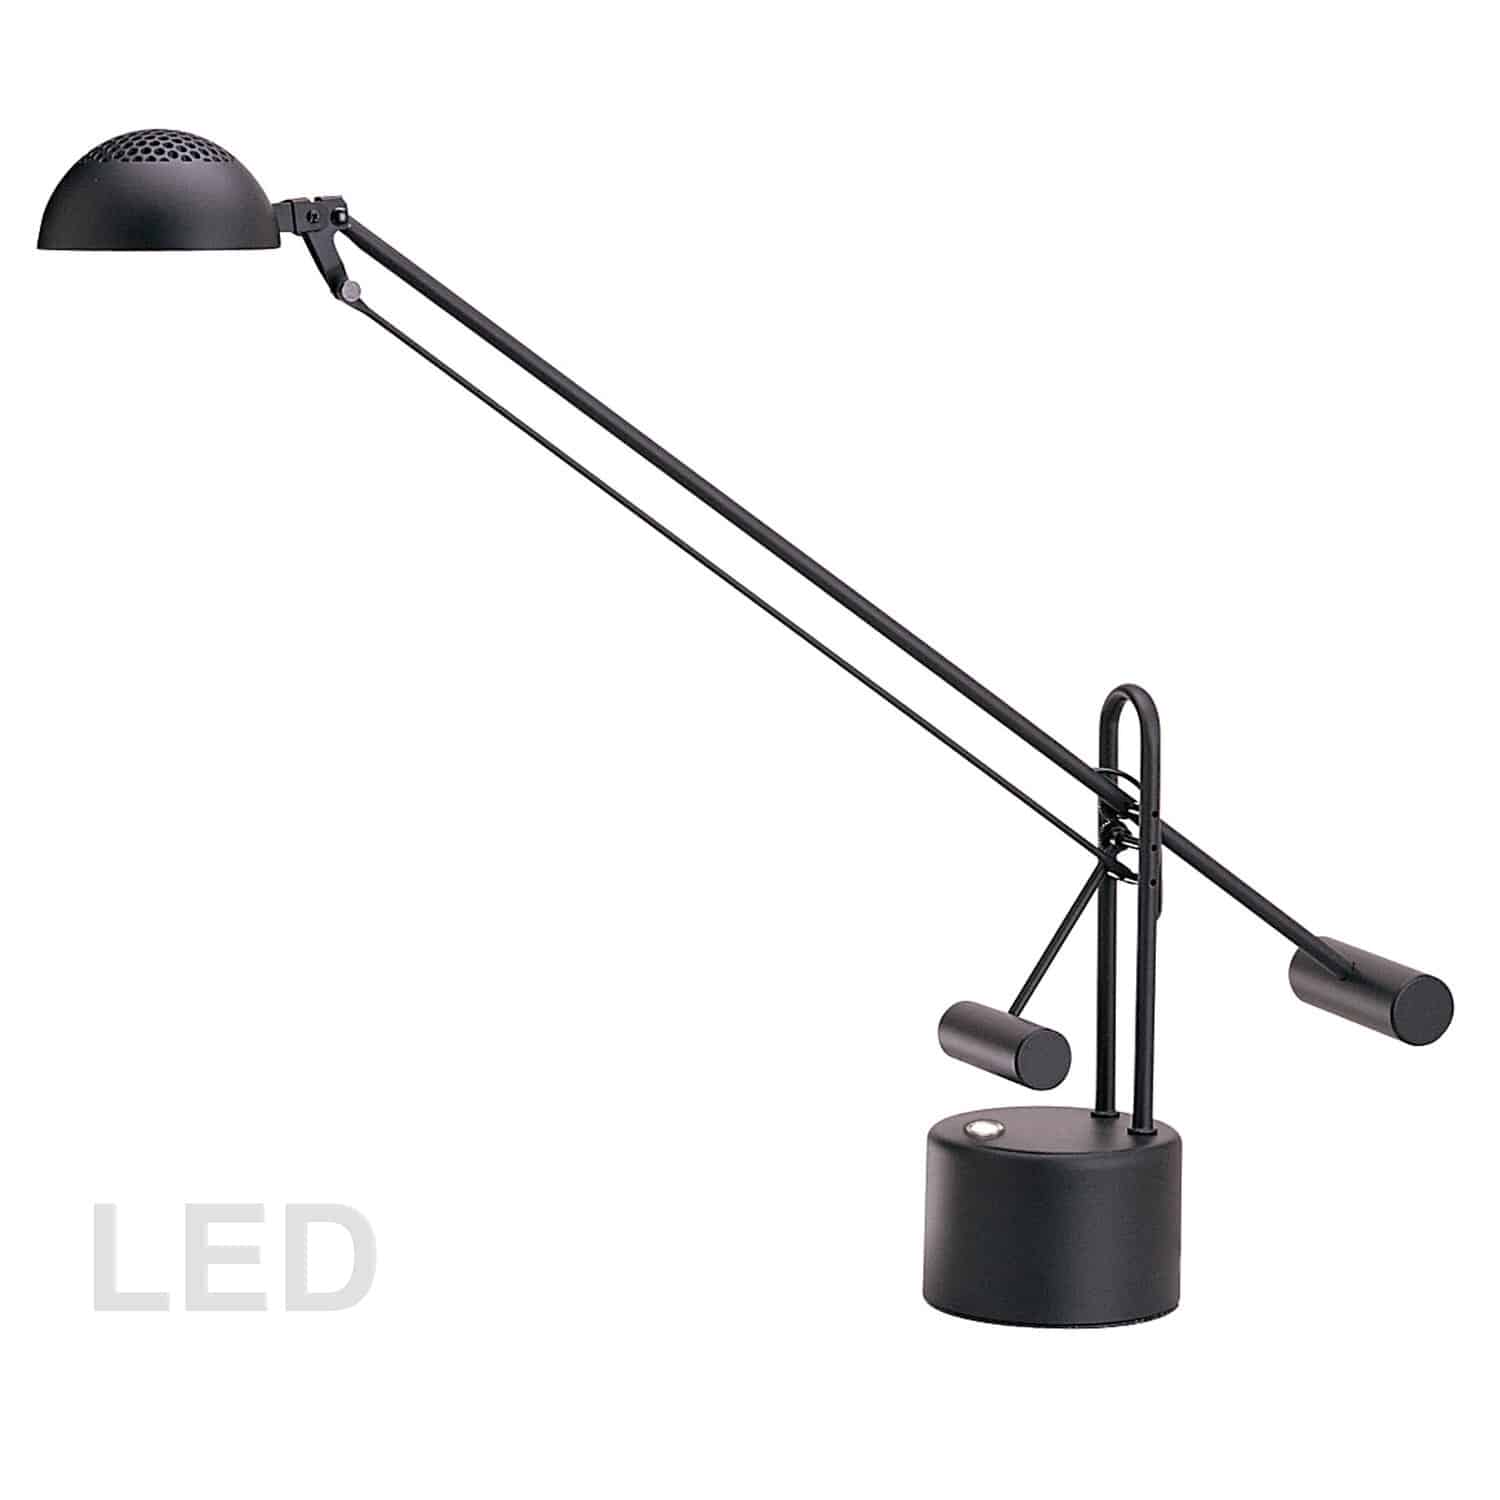 The LED Reading Light collection combines form and function for a stylish spot of light to study, work or enjoy a good book. The design features an LED light. LED fixtures produce light at up to 90 percent better efficiency than incandescent lighting. The wall mounted design incorporates a metal frame with the light base angled upwards, and an arm equipped with an LED that is angled downwards. A gooseneck construction allows you to direct the light at the perfect angle for reading or streaming. With a white fabric shade in a classic or squared drum shape, it's a look that will blend easily with traditional or modern décors.